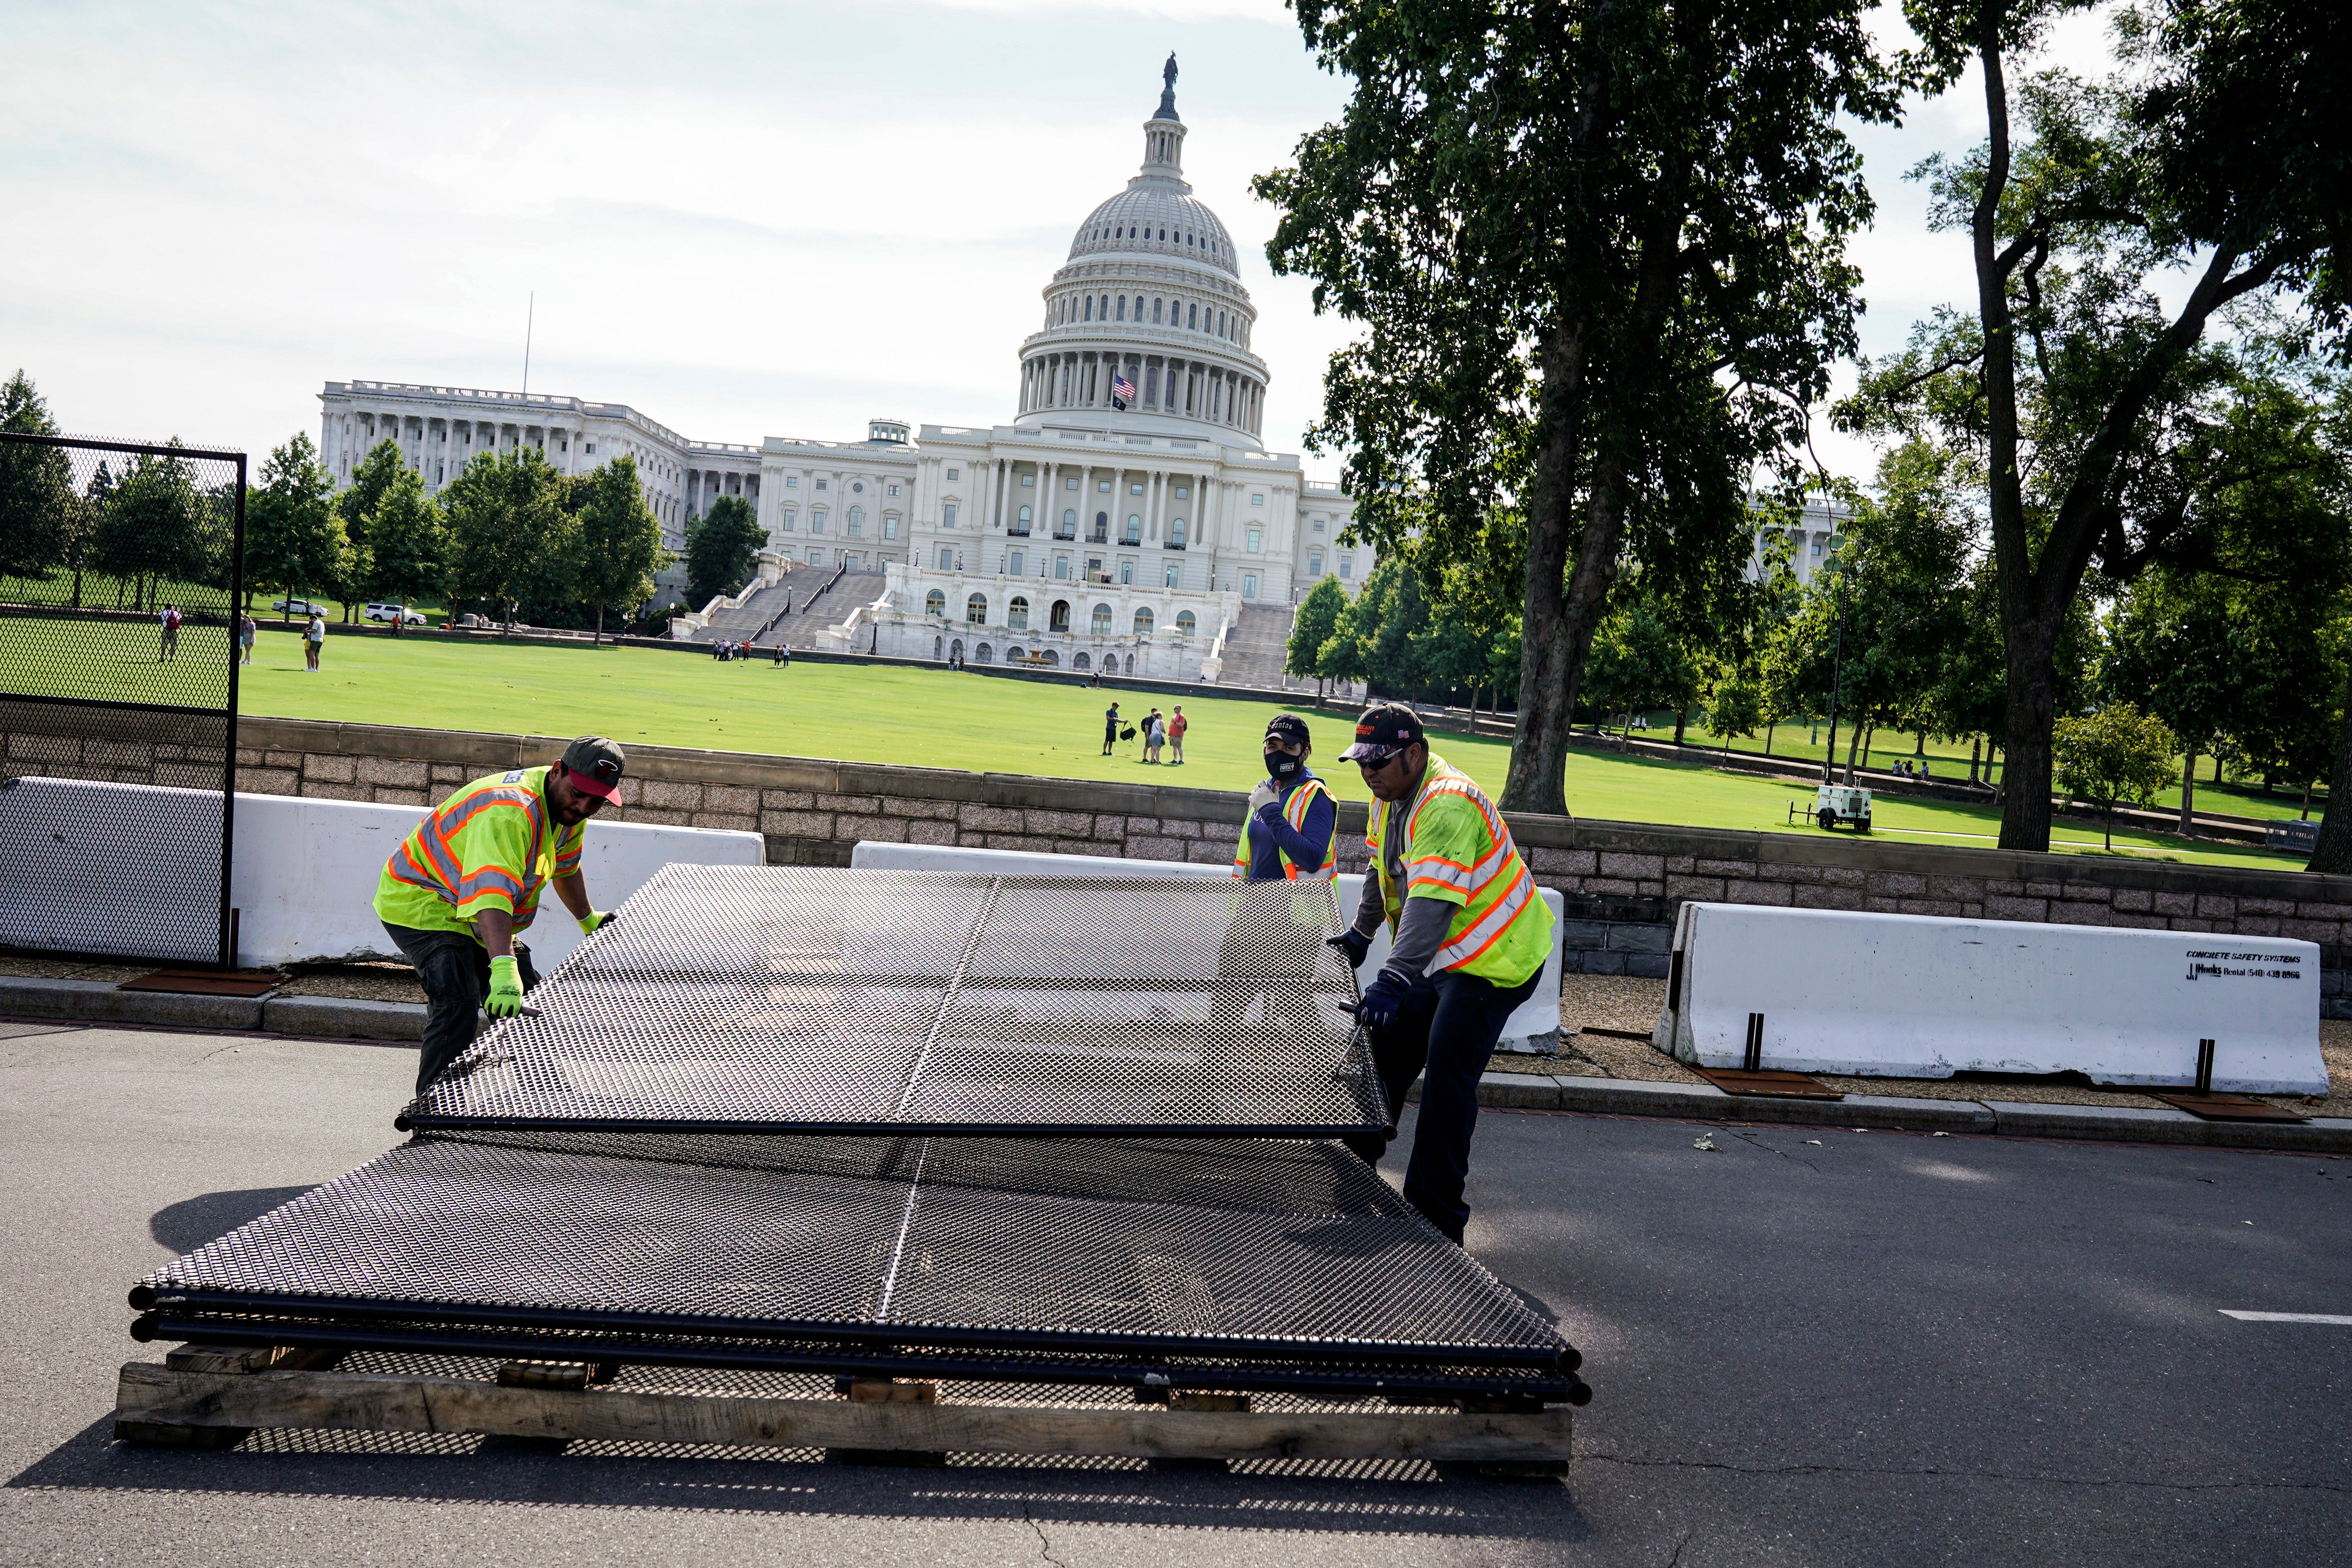 Crowds return to the US Capitol grounds in Washington DC on 10 July after crews removed the final barricades installed after the riot on 6 January.